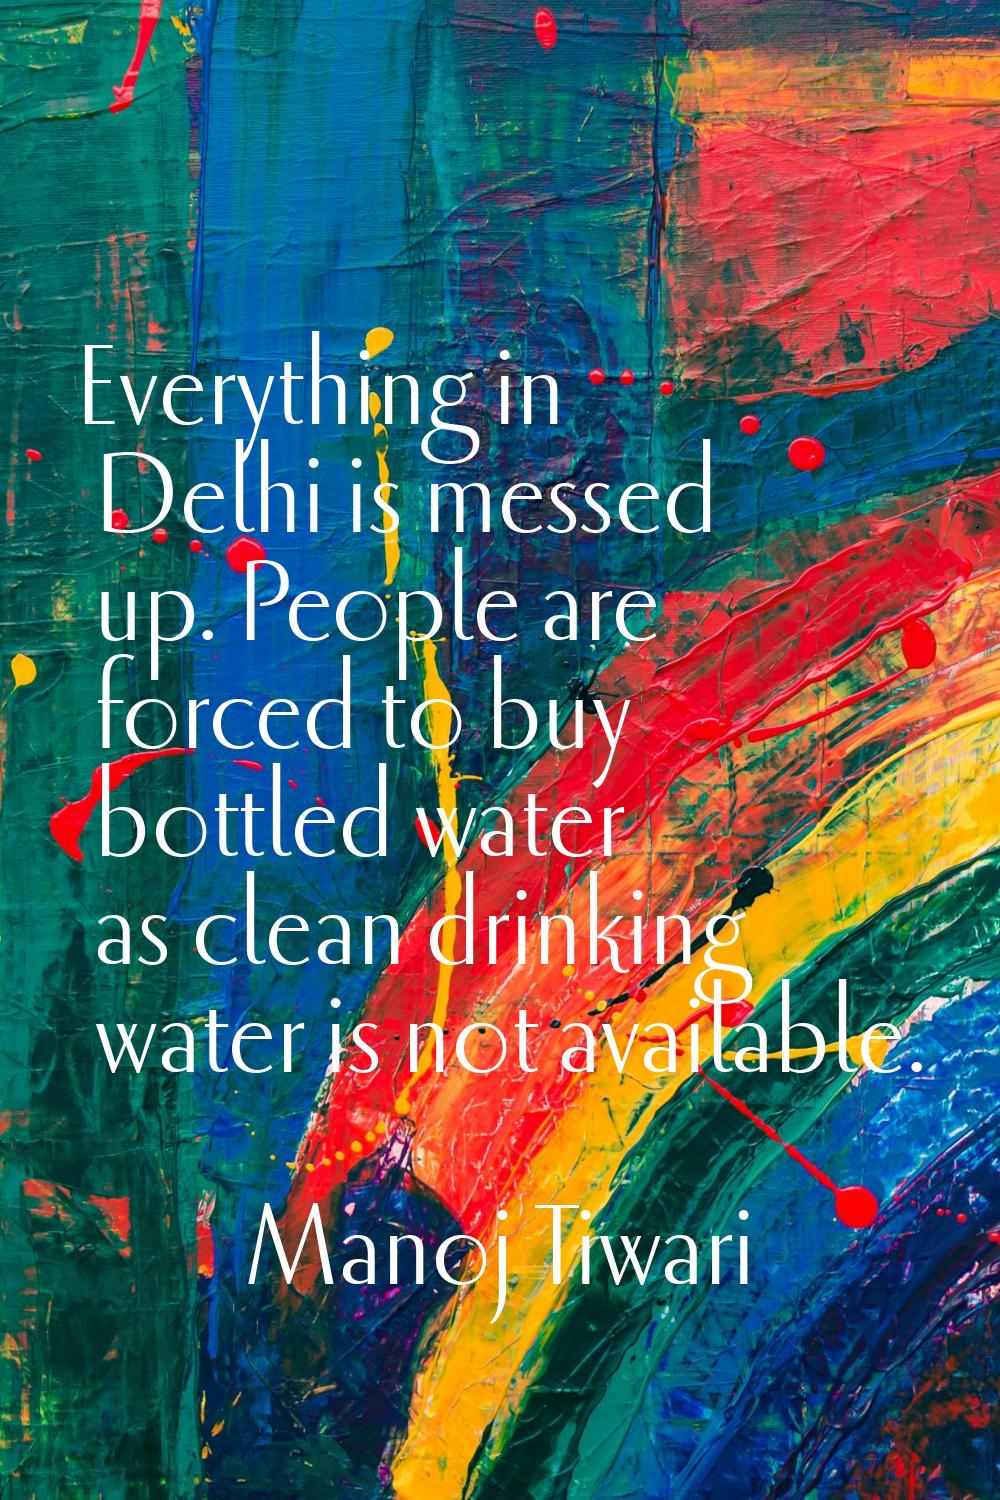 Everything in Delhi is messed up. People are forced to buy bottled water as clean drinking water is